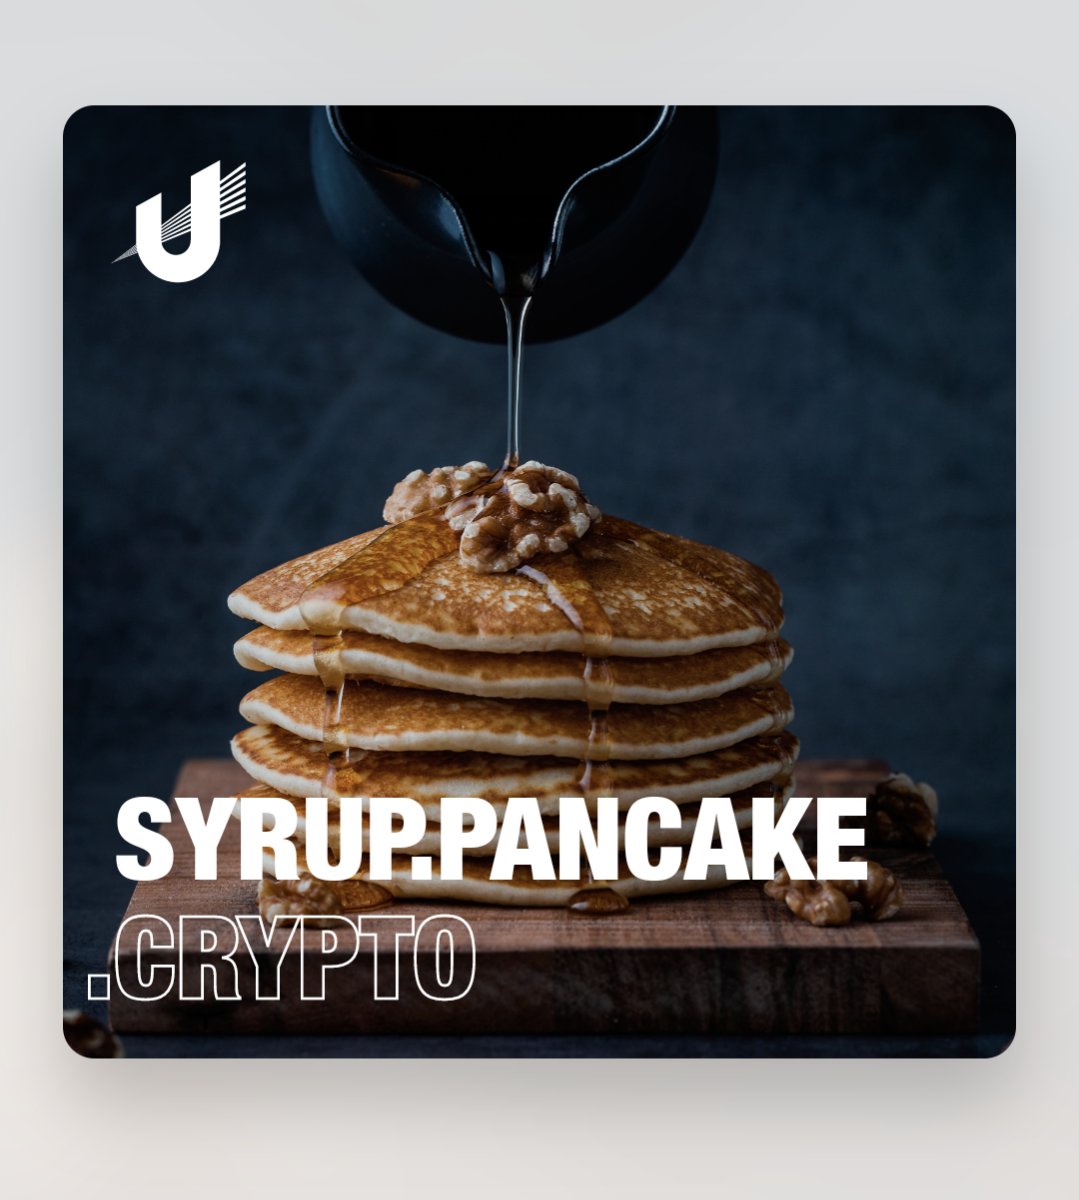 @requestsongs Nice! I poured a little sugar on mine #syrup @PancakeSwap